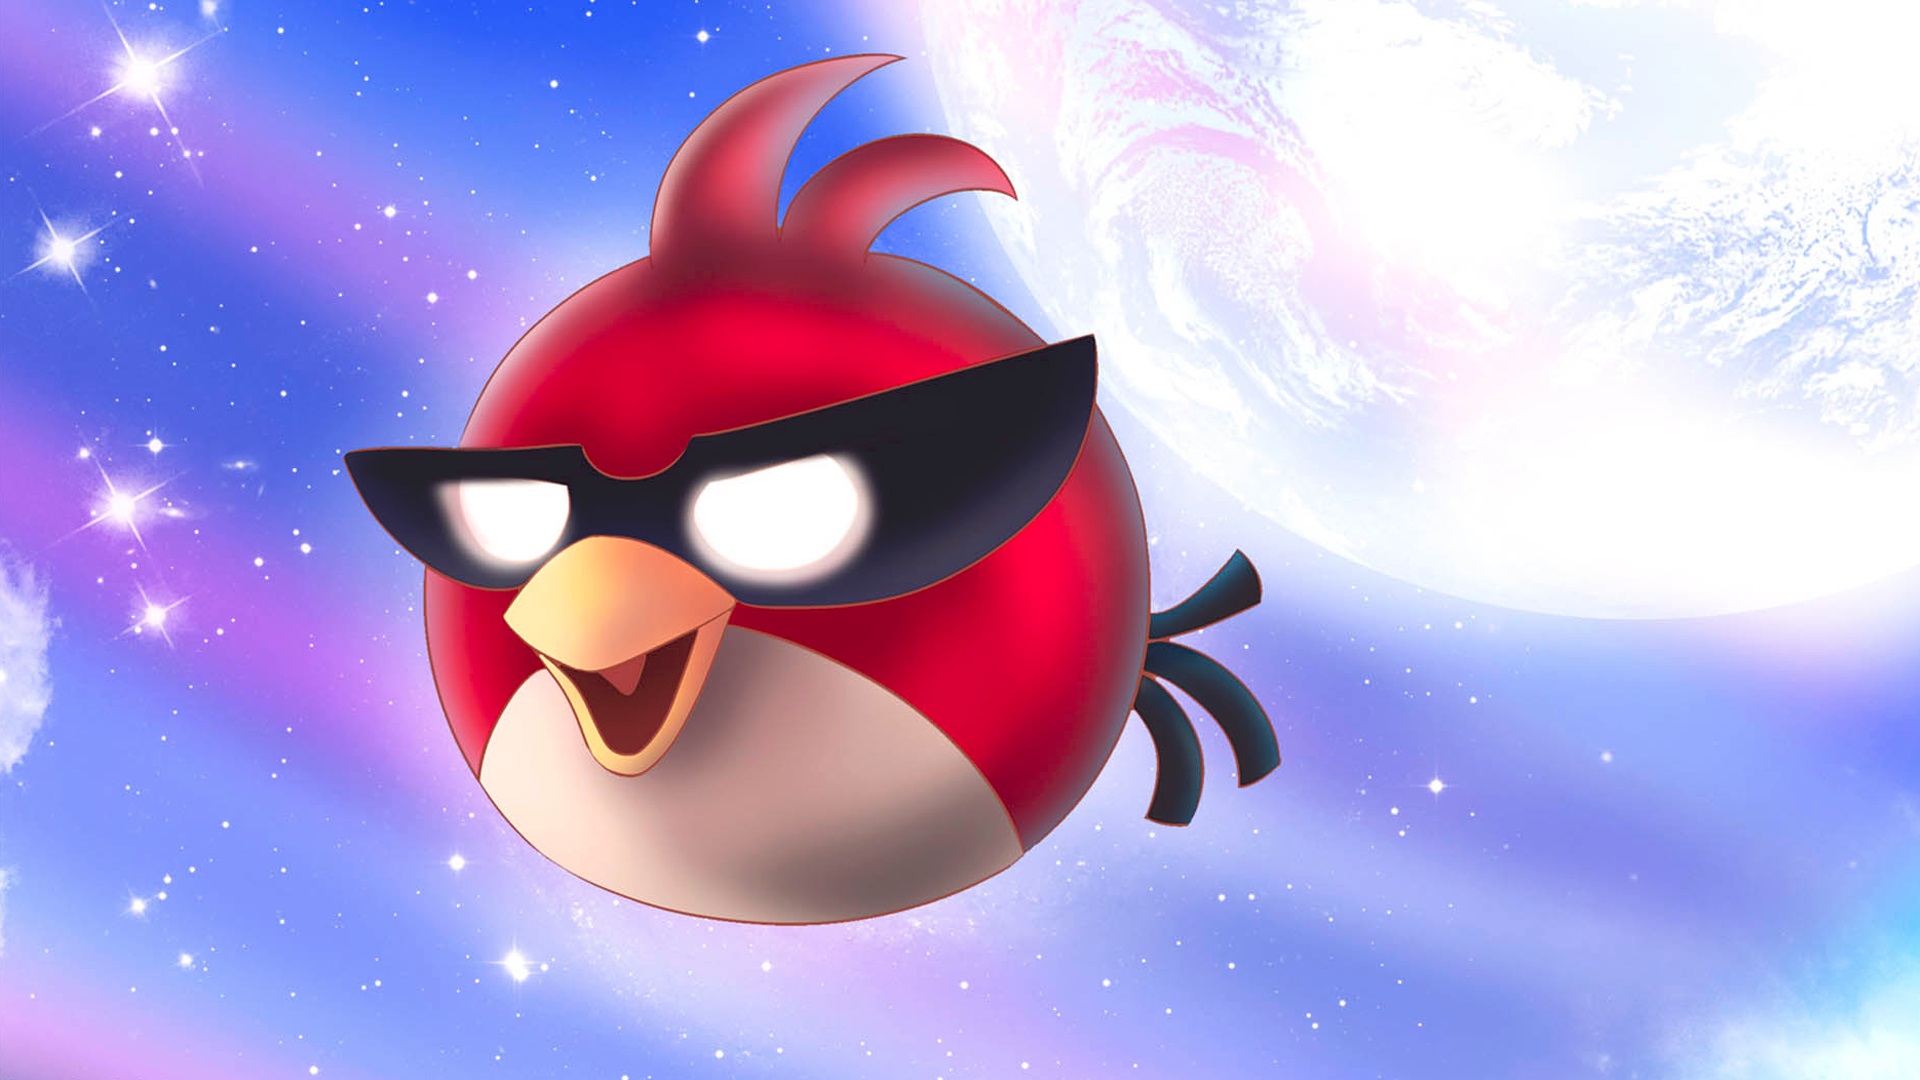 Wallpaper #18 Wallpaper from Angry Birds Space | gamepressure.com